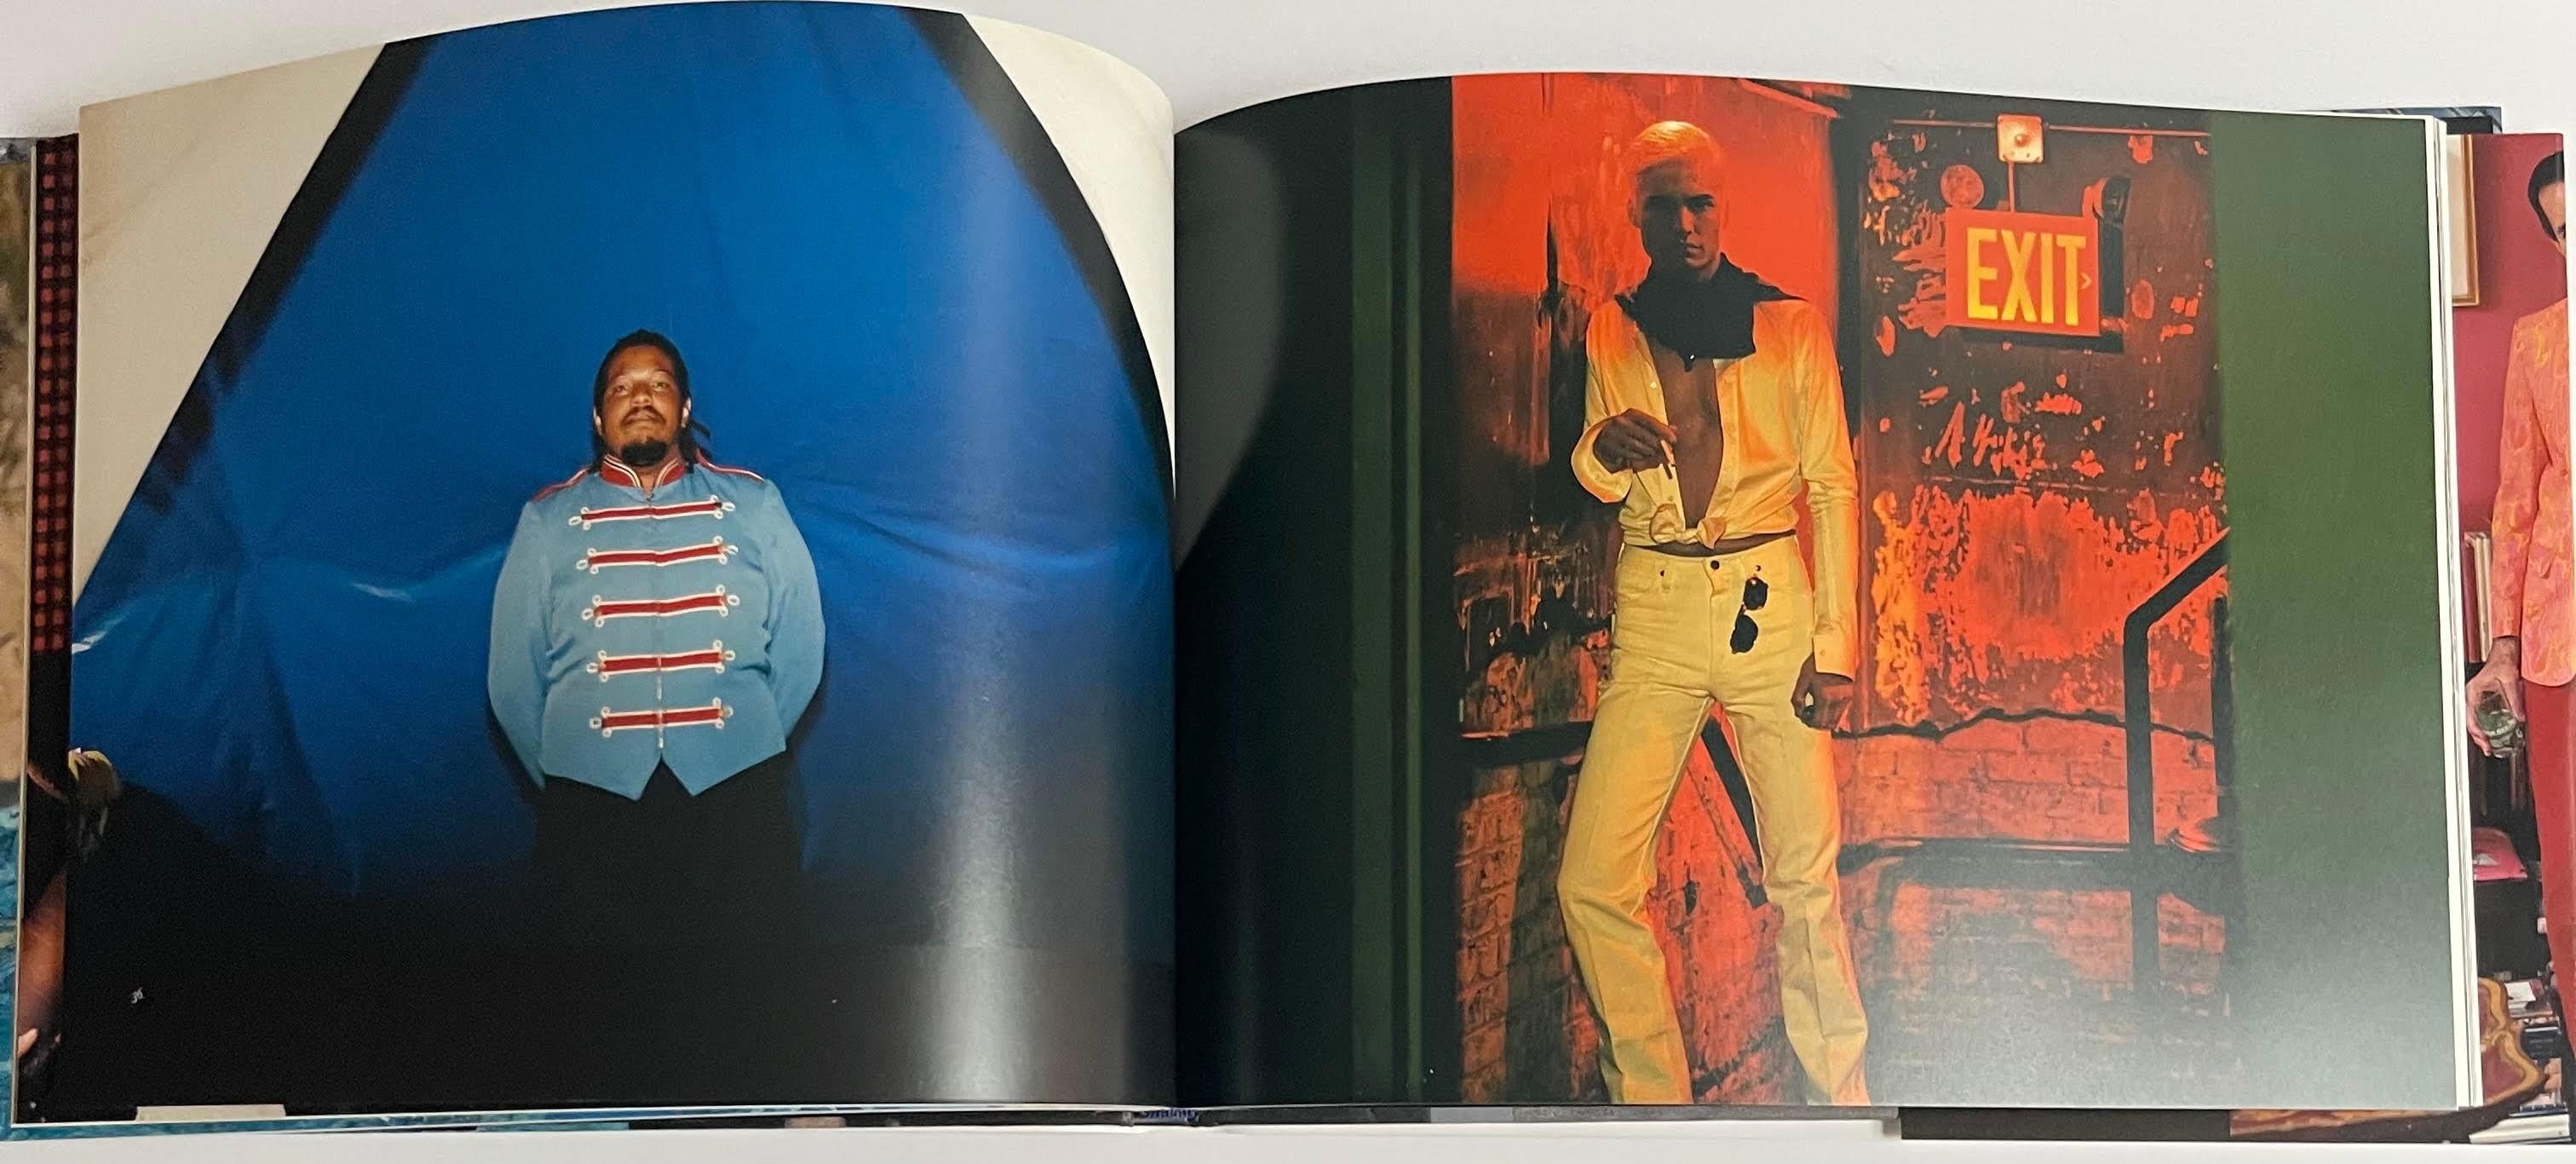 Players (Signed and dated by Tina Barney) monograph by renowned photographer  For Sale 5